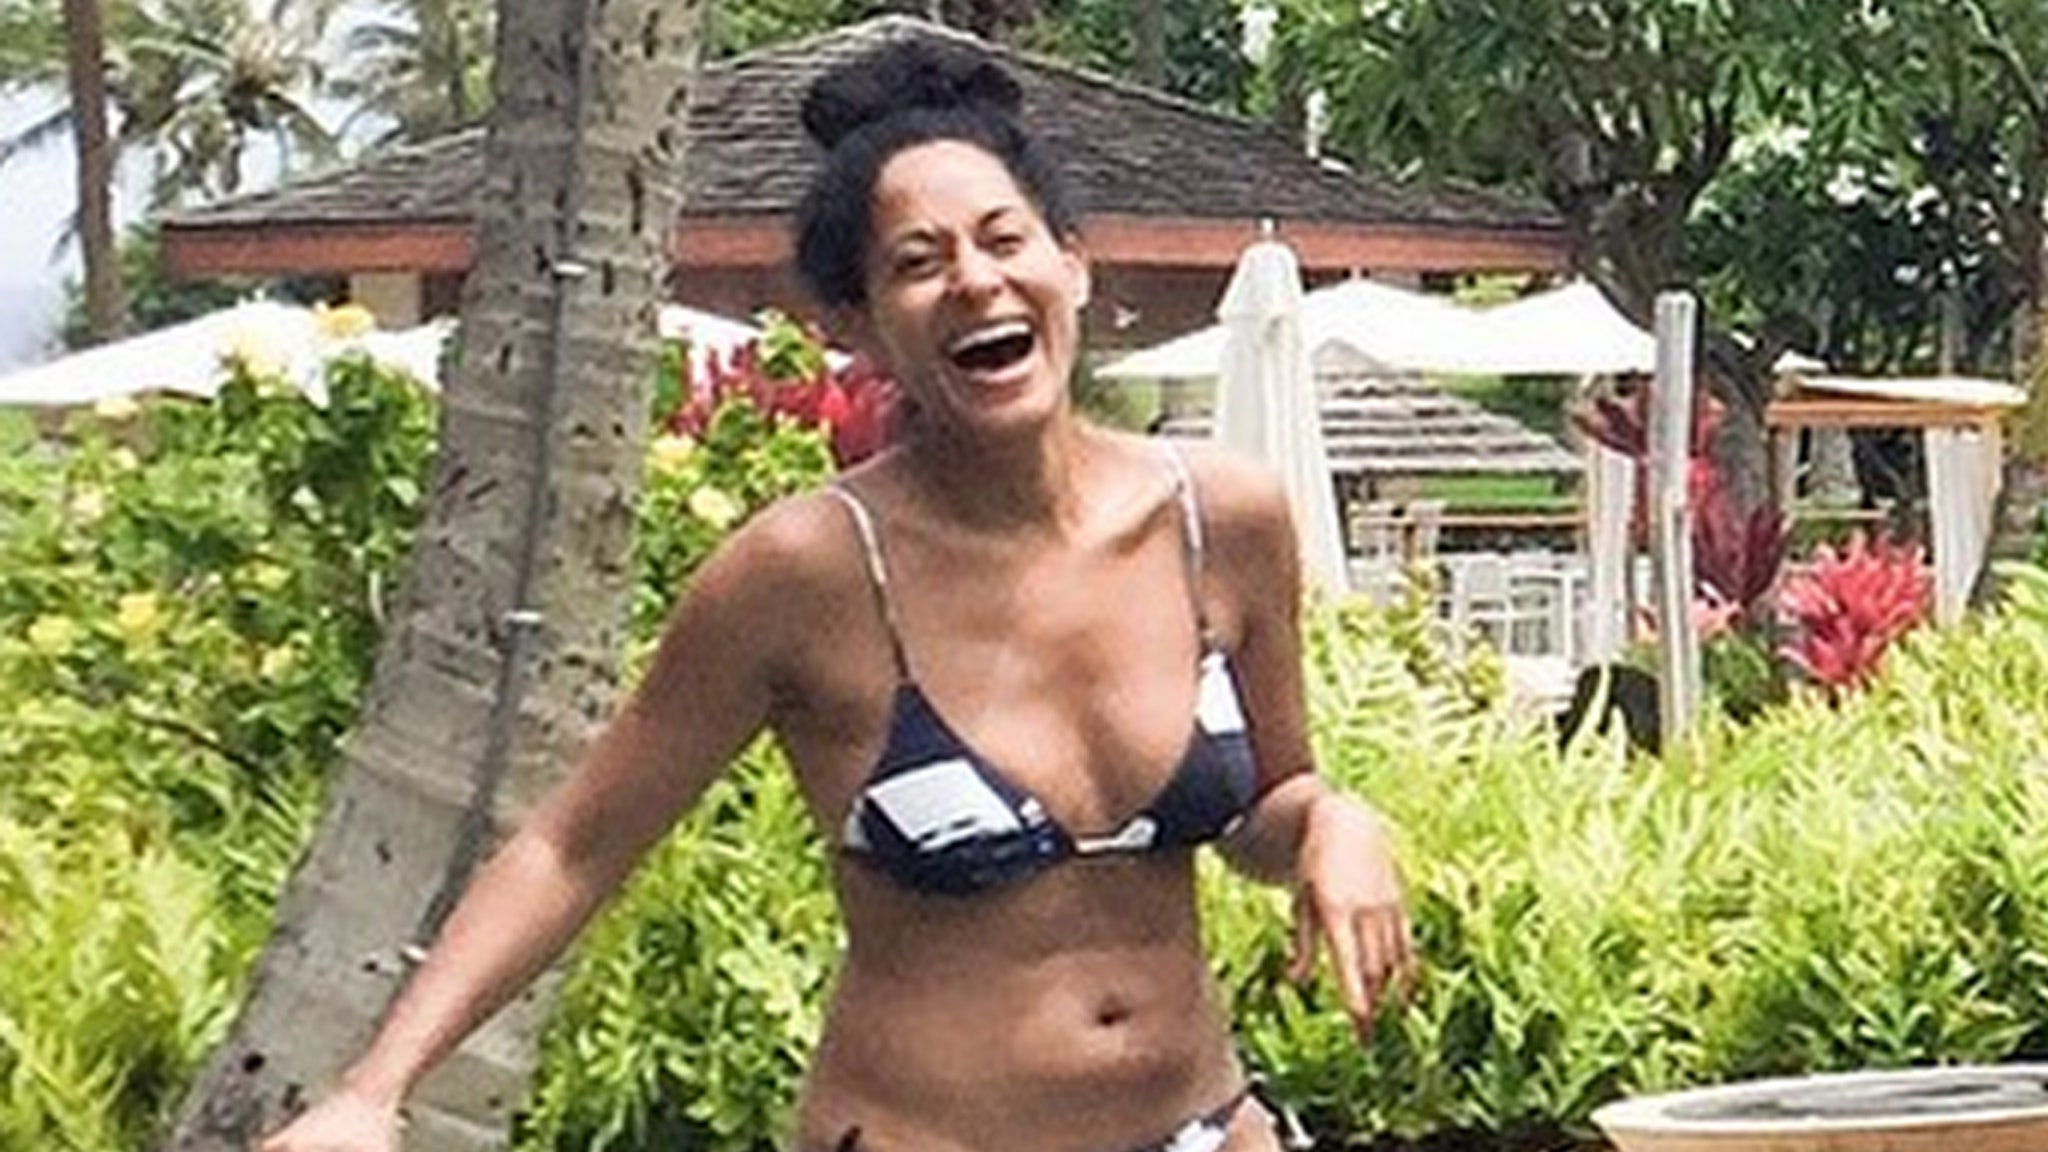 Naked pictures of tracee ellis ross - 🧡 51 Sexy Tracee Ellis Ross...